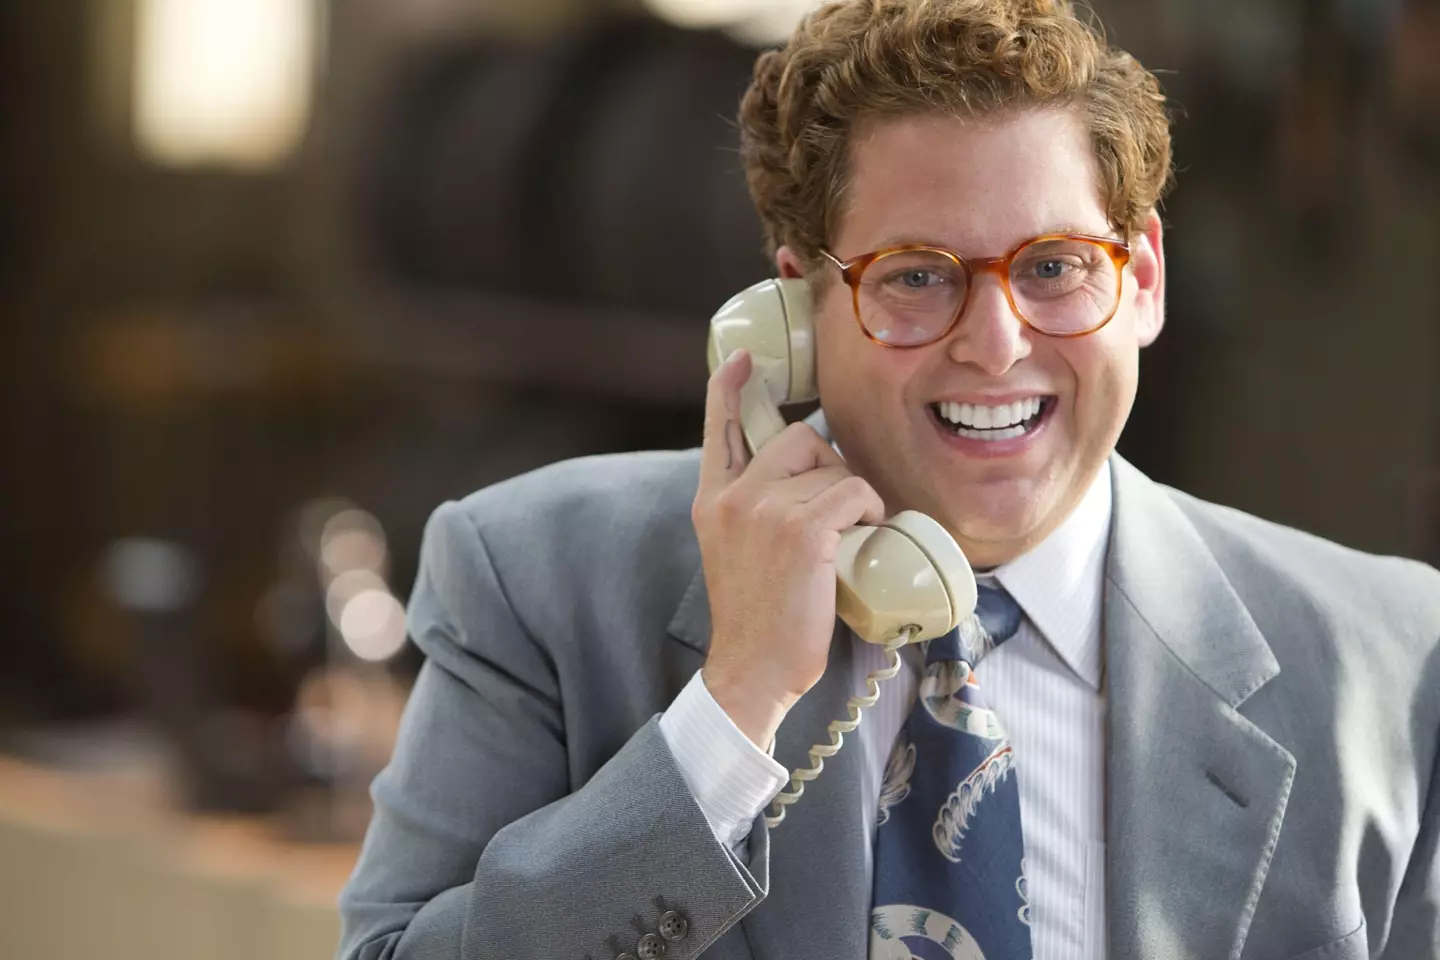 Jonah Hill in The Wolf of Wall Street.